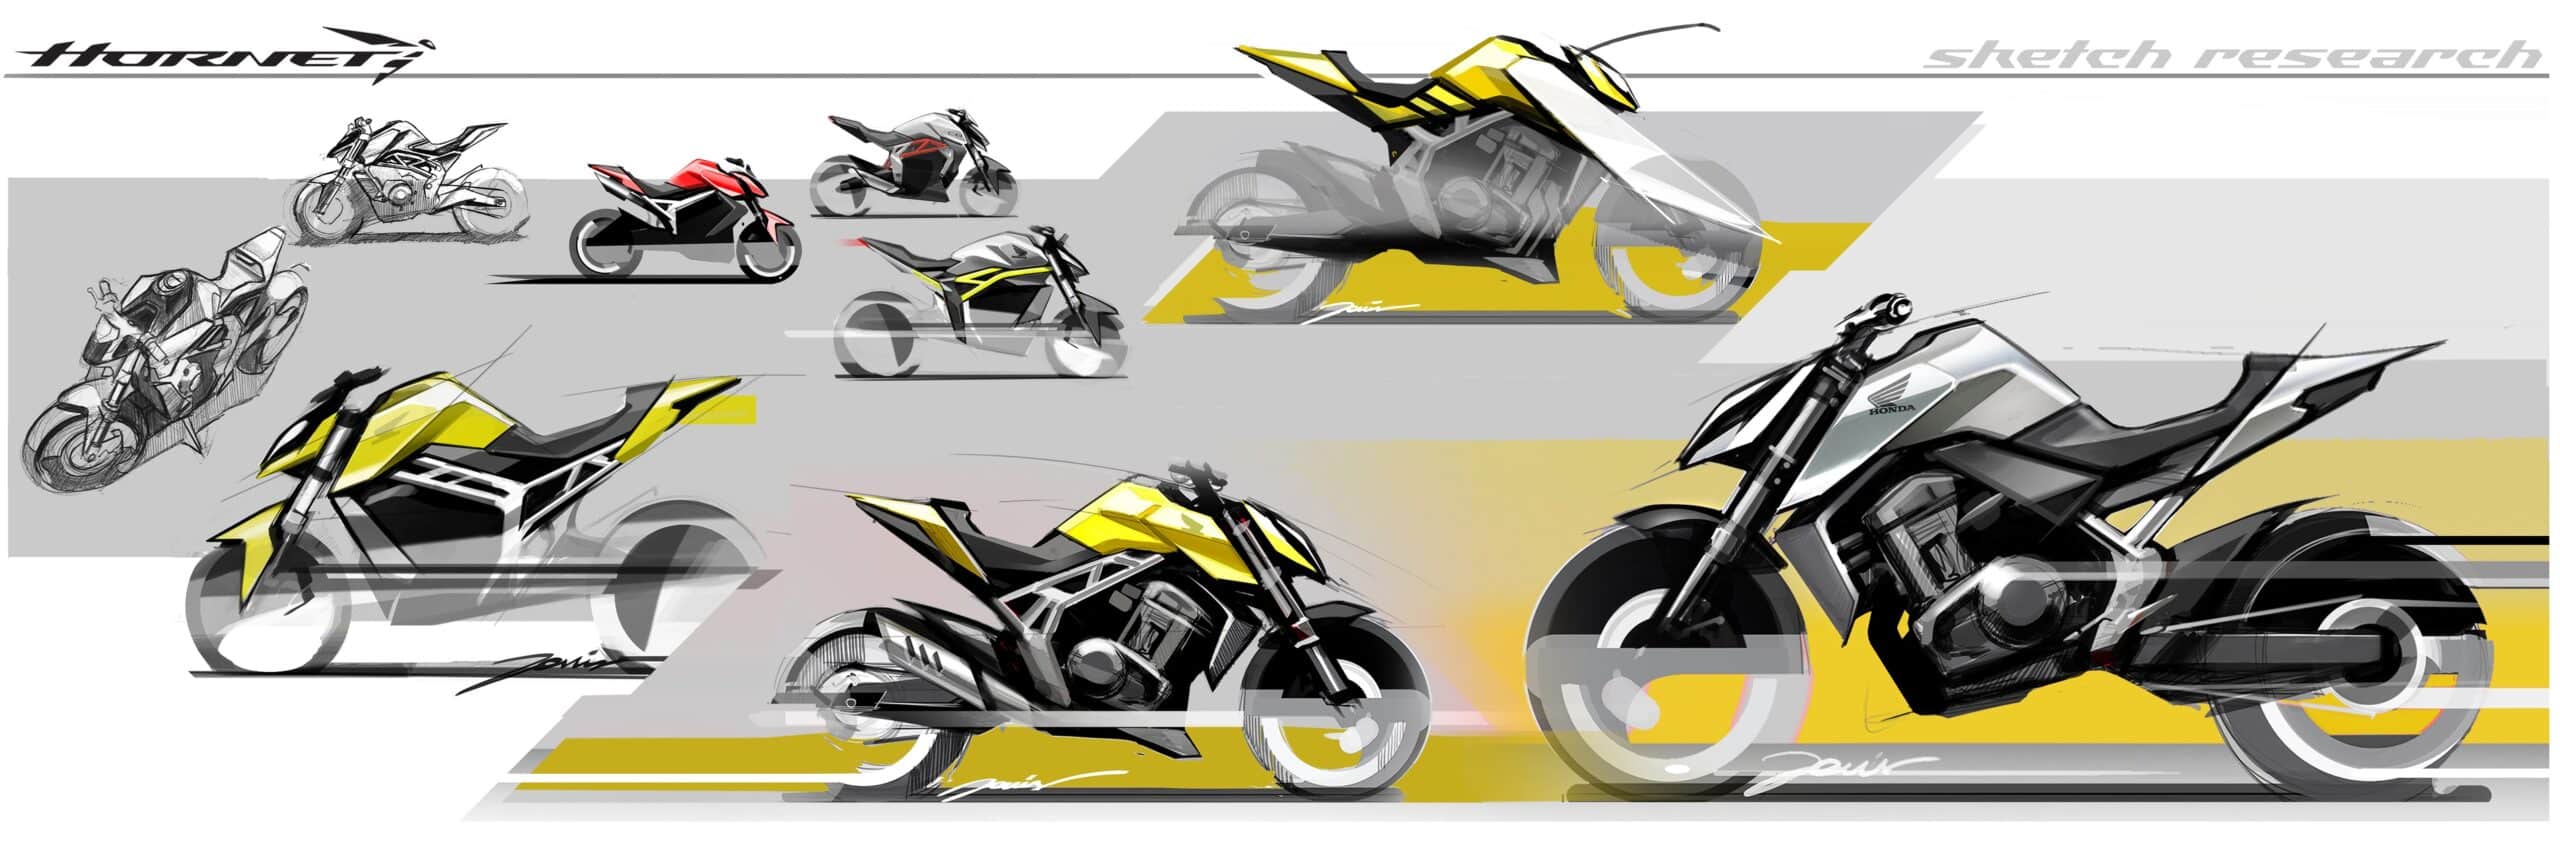 371424 New Hornet design concept sketches hint at the sting in its tail scaled - Moto Honda Motopel